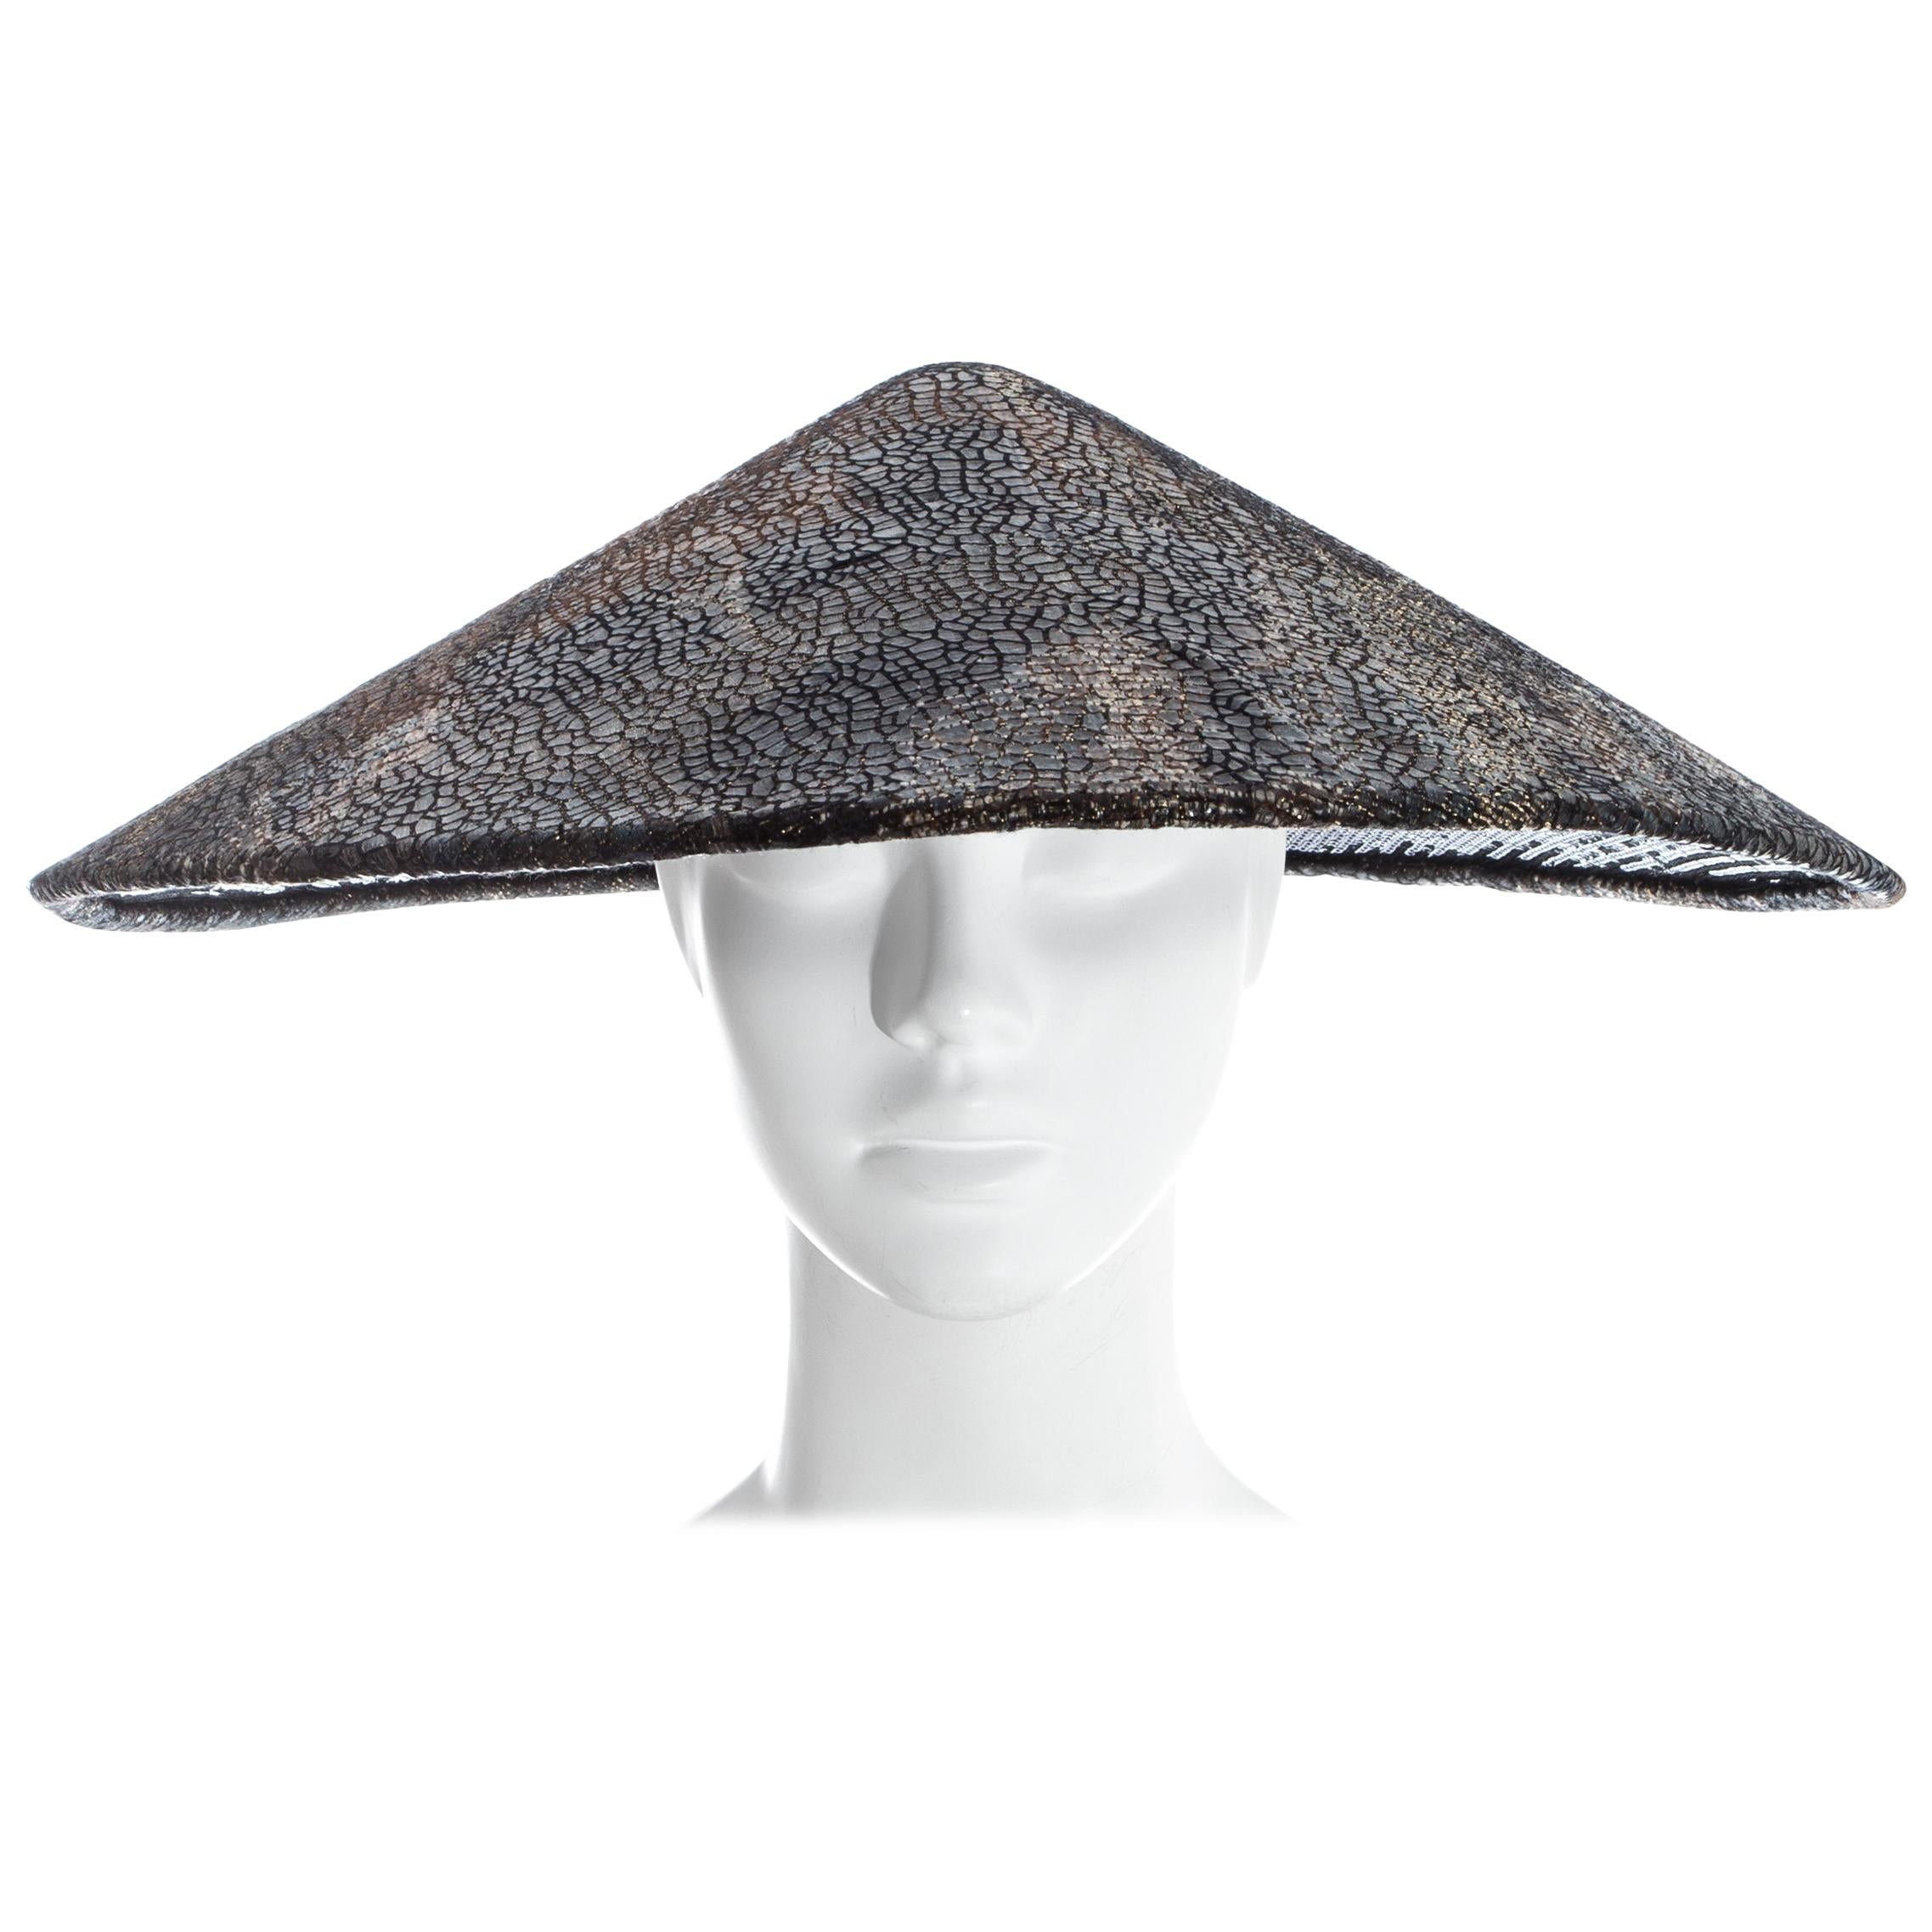 Chanel by Karl Lagerfeld, Bronze, gold and black tweed conical evening hat with textured overlay and black sequin lining. 

'Paris-Shangai' Pre-Fall 2010